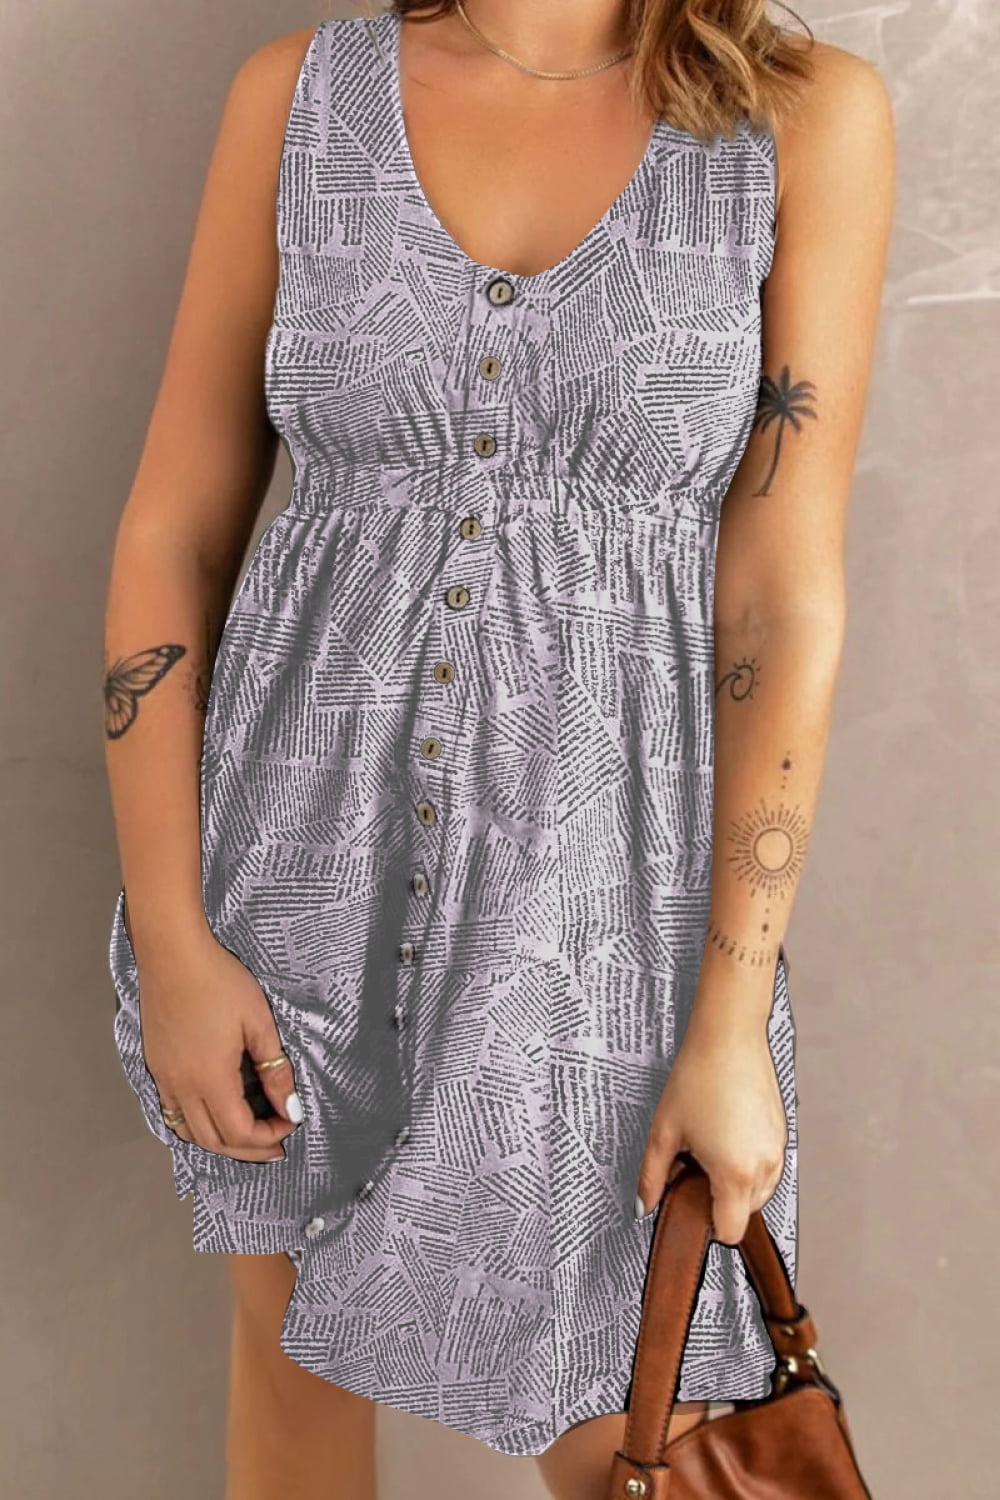 Double Take Buttoned Dress